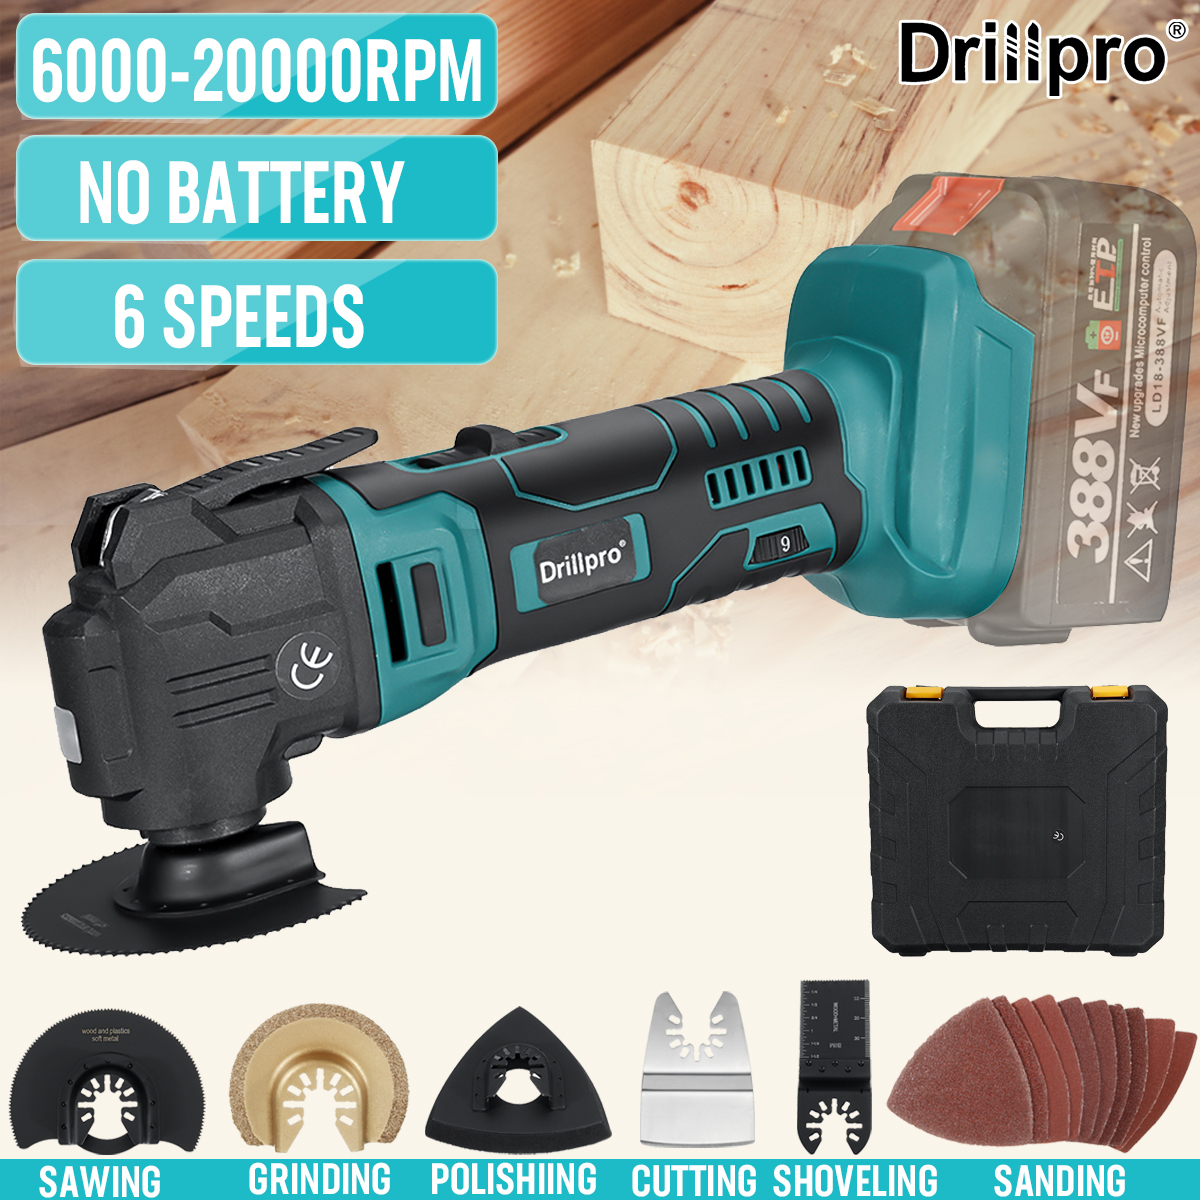 Drillpro-Electric-Cordless-Oscillating-Multi-Tool-Bare-Metal-Machine-Without-Battery-with-Plastic-Bo-1957681-8